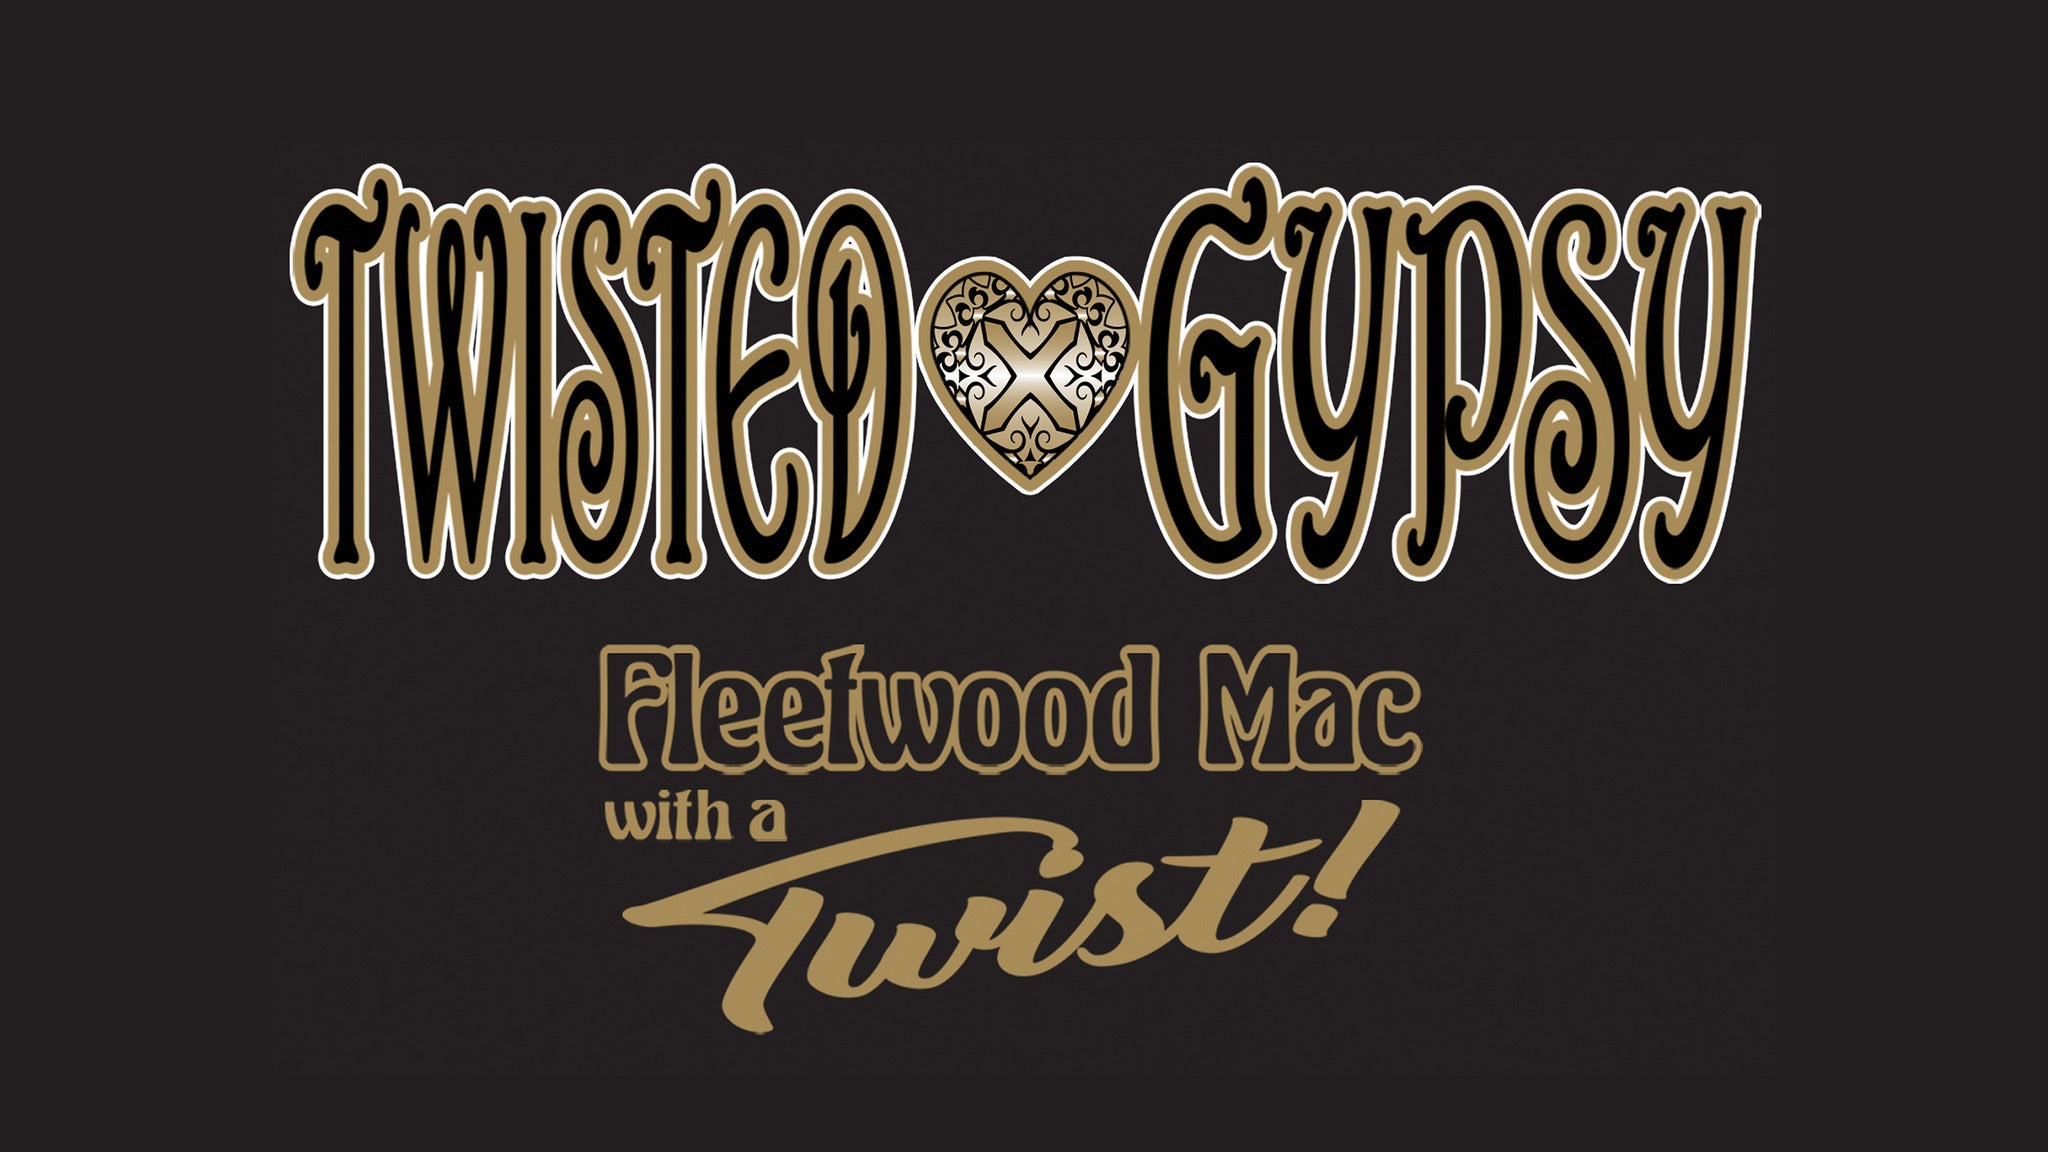 presale password for Twisted Gypsy - Fleetwood Mac Tribute Band tickets in El Cajon - CA (The Magnolia)